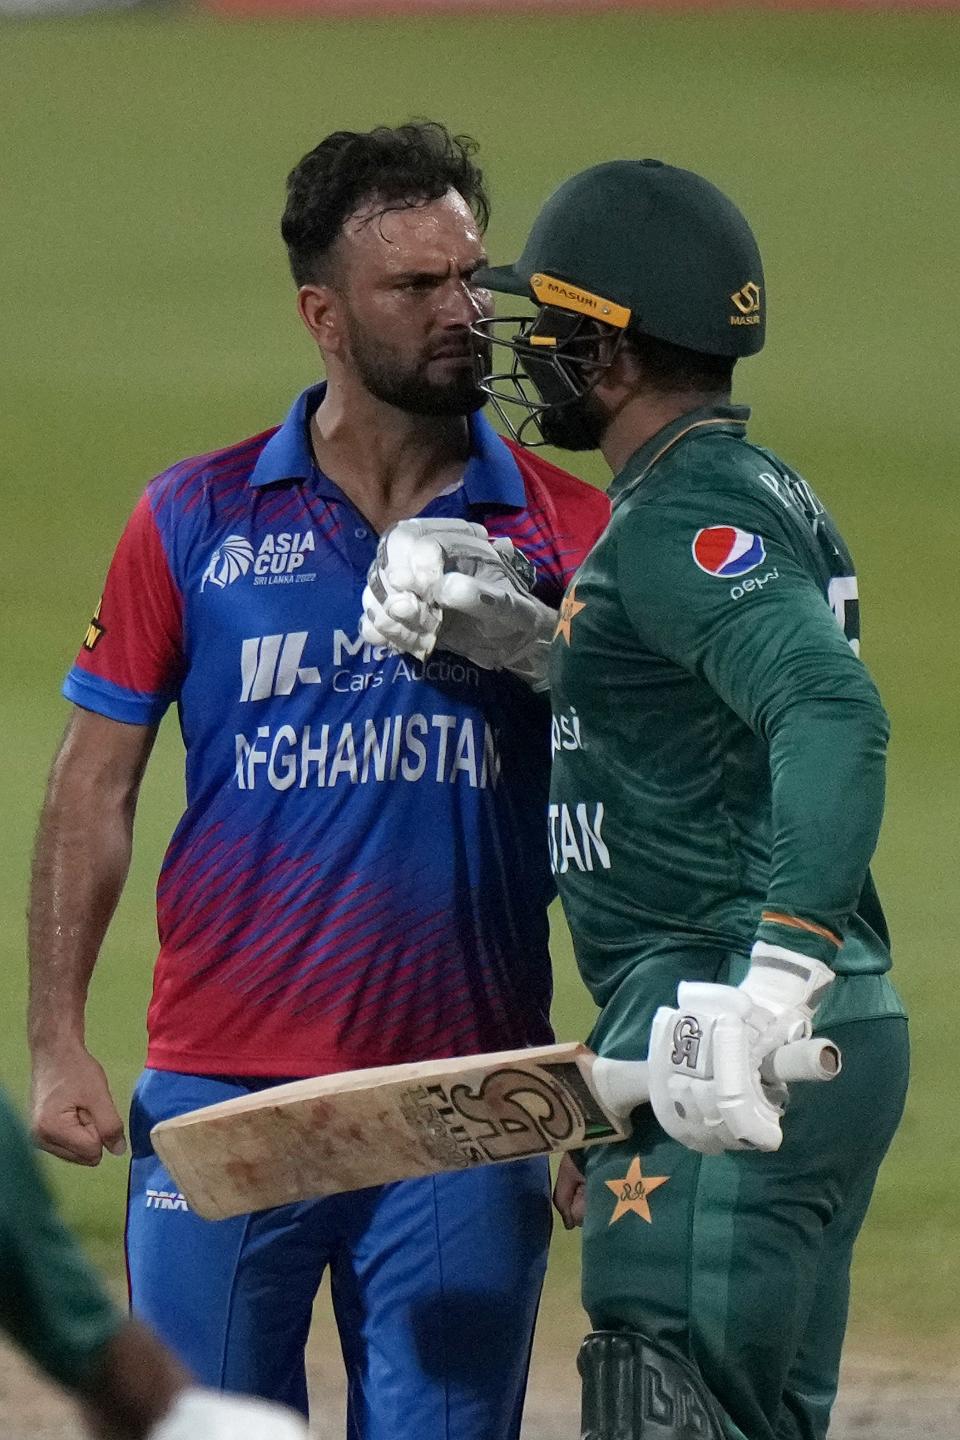 Afghanistan's Fareed Ahmad, left, and Pakistan's Asif Ali, right, react after Ali was dismissed by Ahmad during the T20 cricket match of Asia Cup between Pakistan and Afghanistan, in Sharjah, United Arab Emirates, Wednesday, Sept. 7, 2022. (AP Photo/Anjum Naveed)